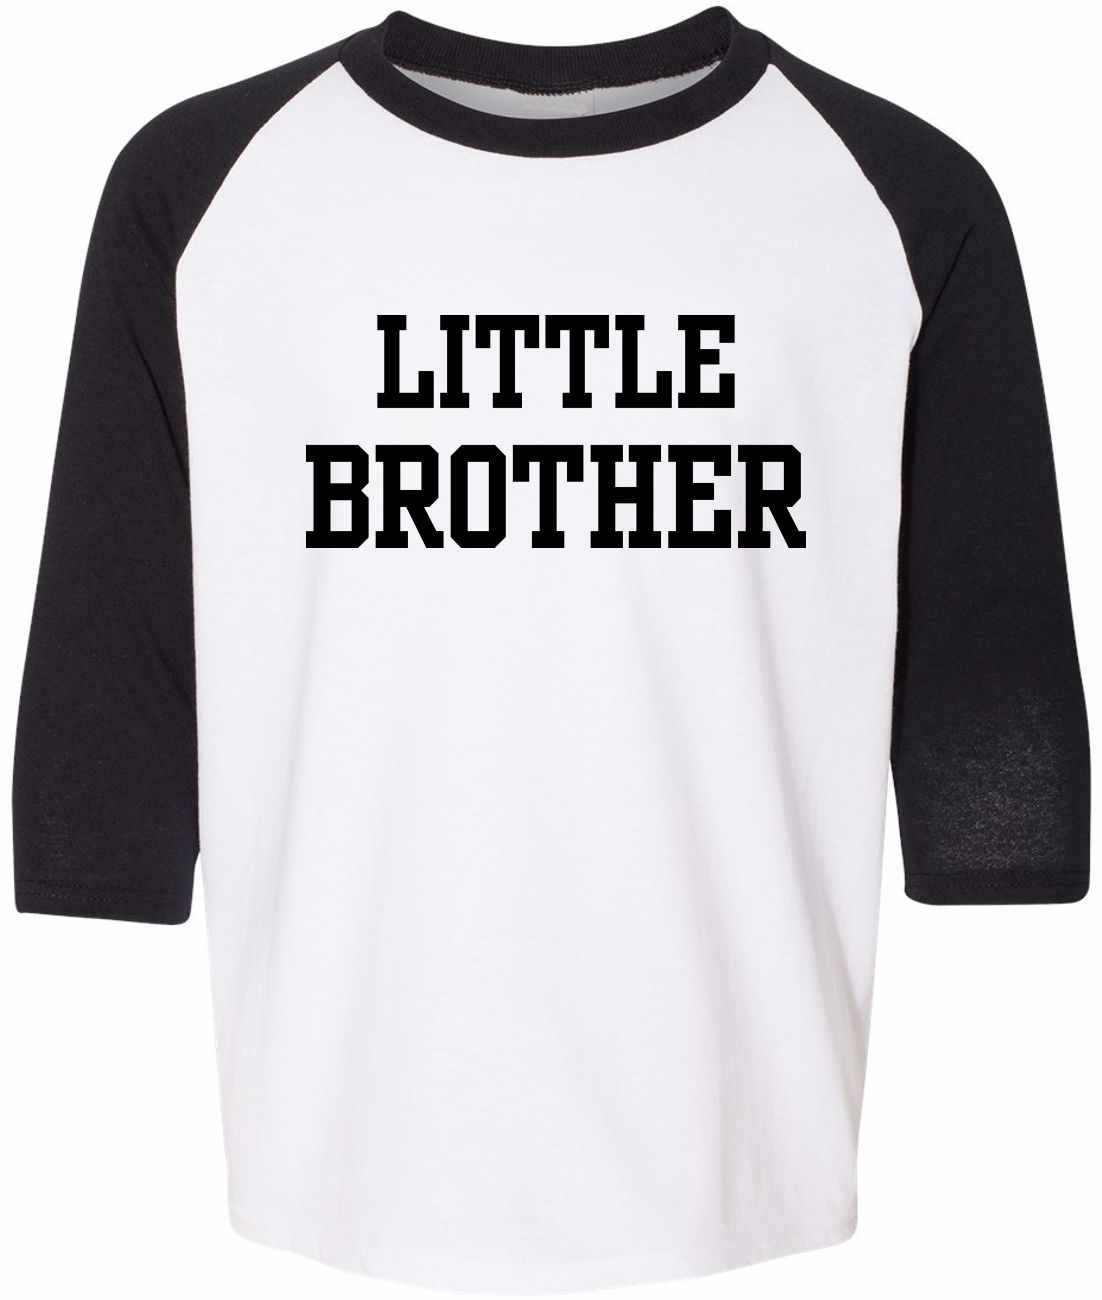 LITTLE BROTHER on Youth Baseball Shirt (#1111-212)